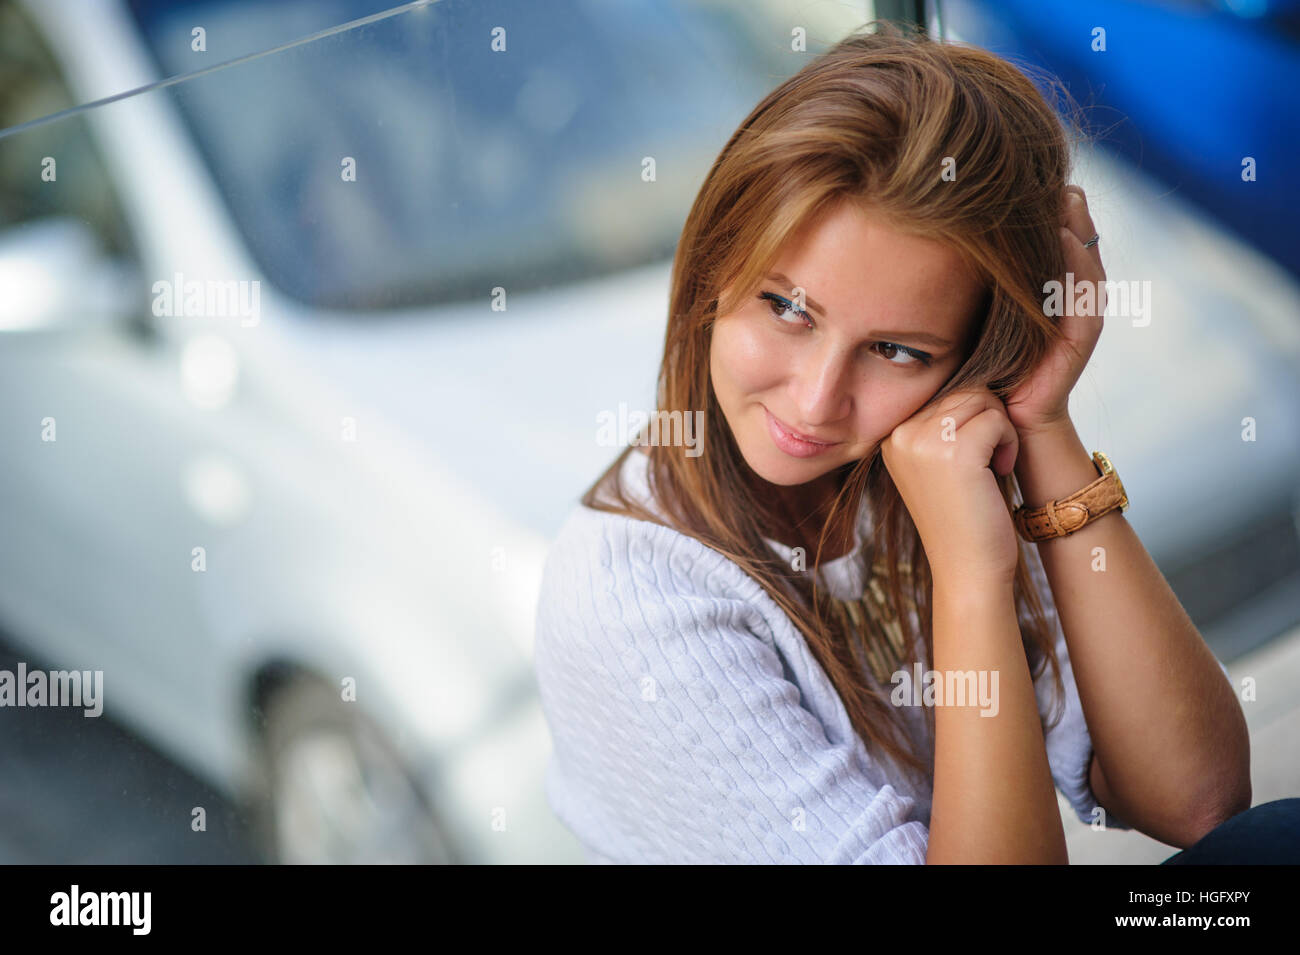 young beautiful woman posing against background of car Stock Photo